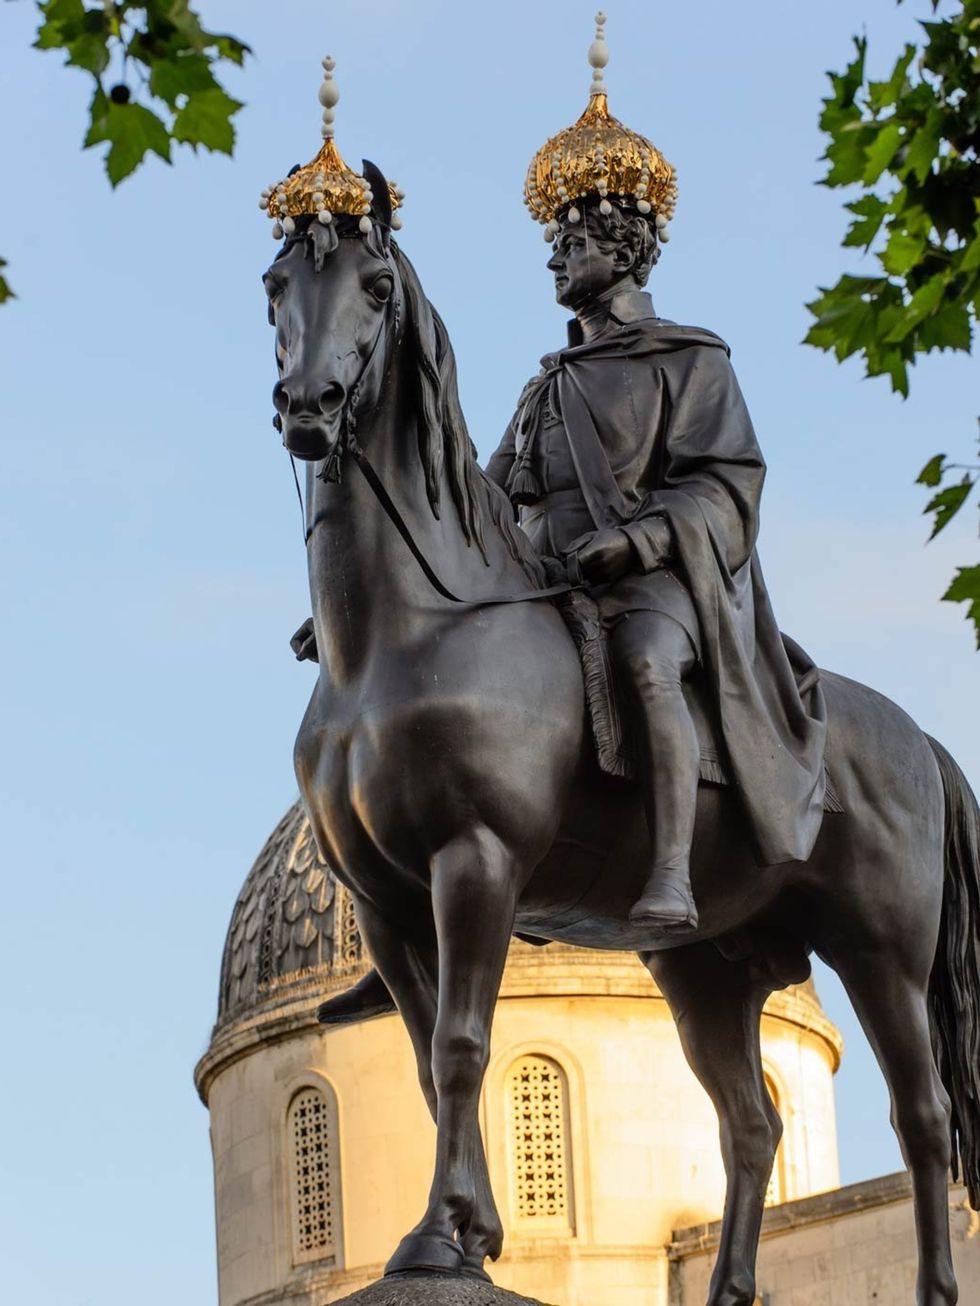 <p>Stephen Jones's crowns on the mounted sculpture of King George IV in Trafalgar Square</p>